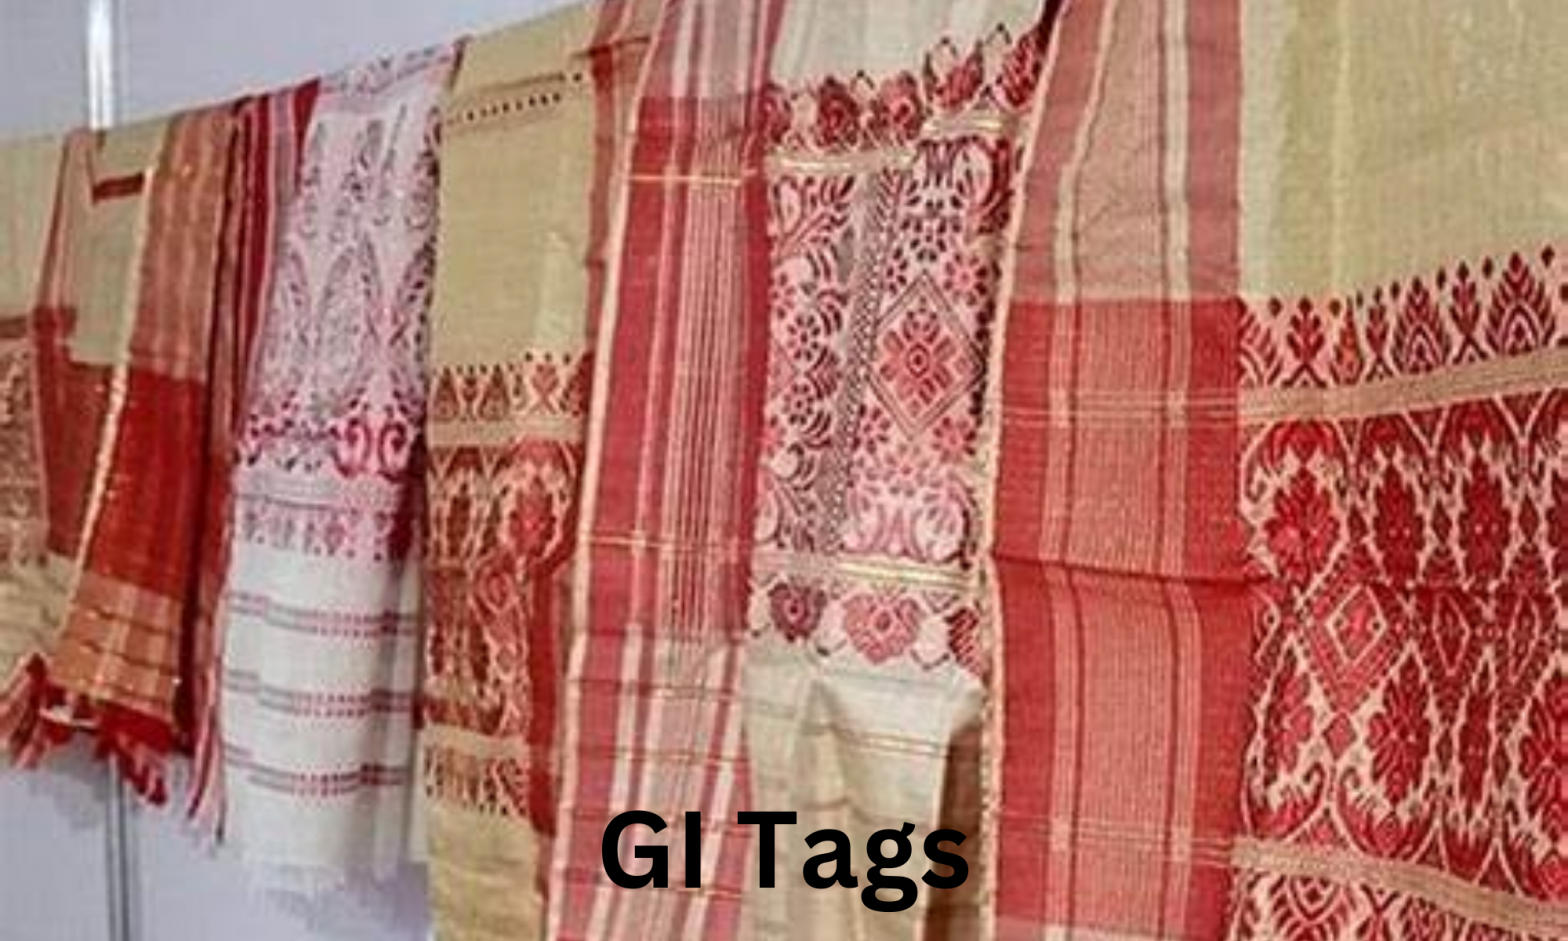 GI tags from Assam: